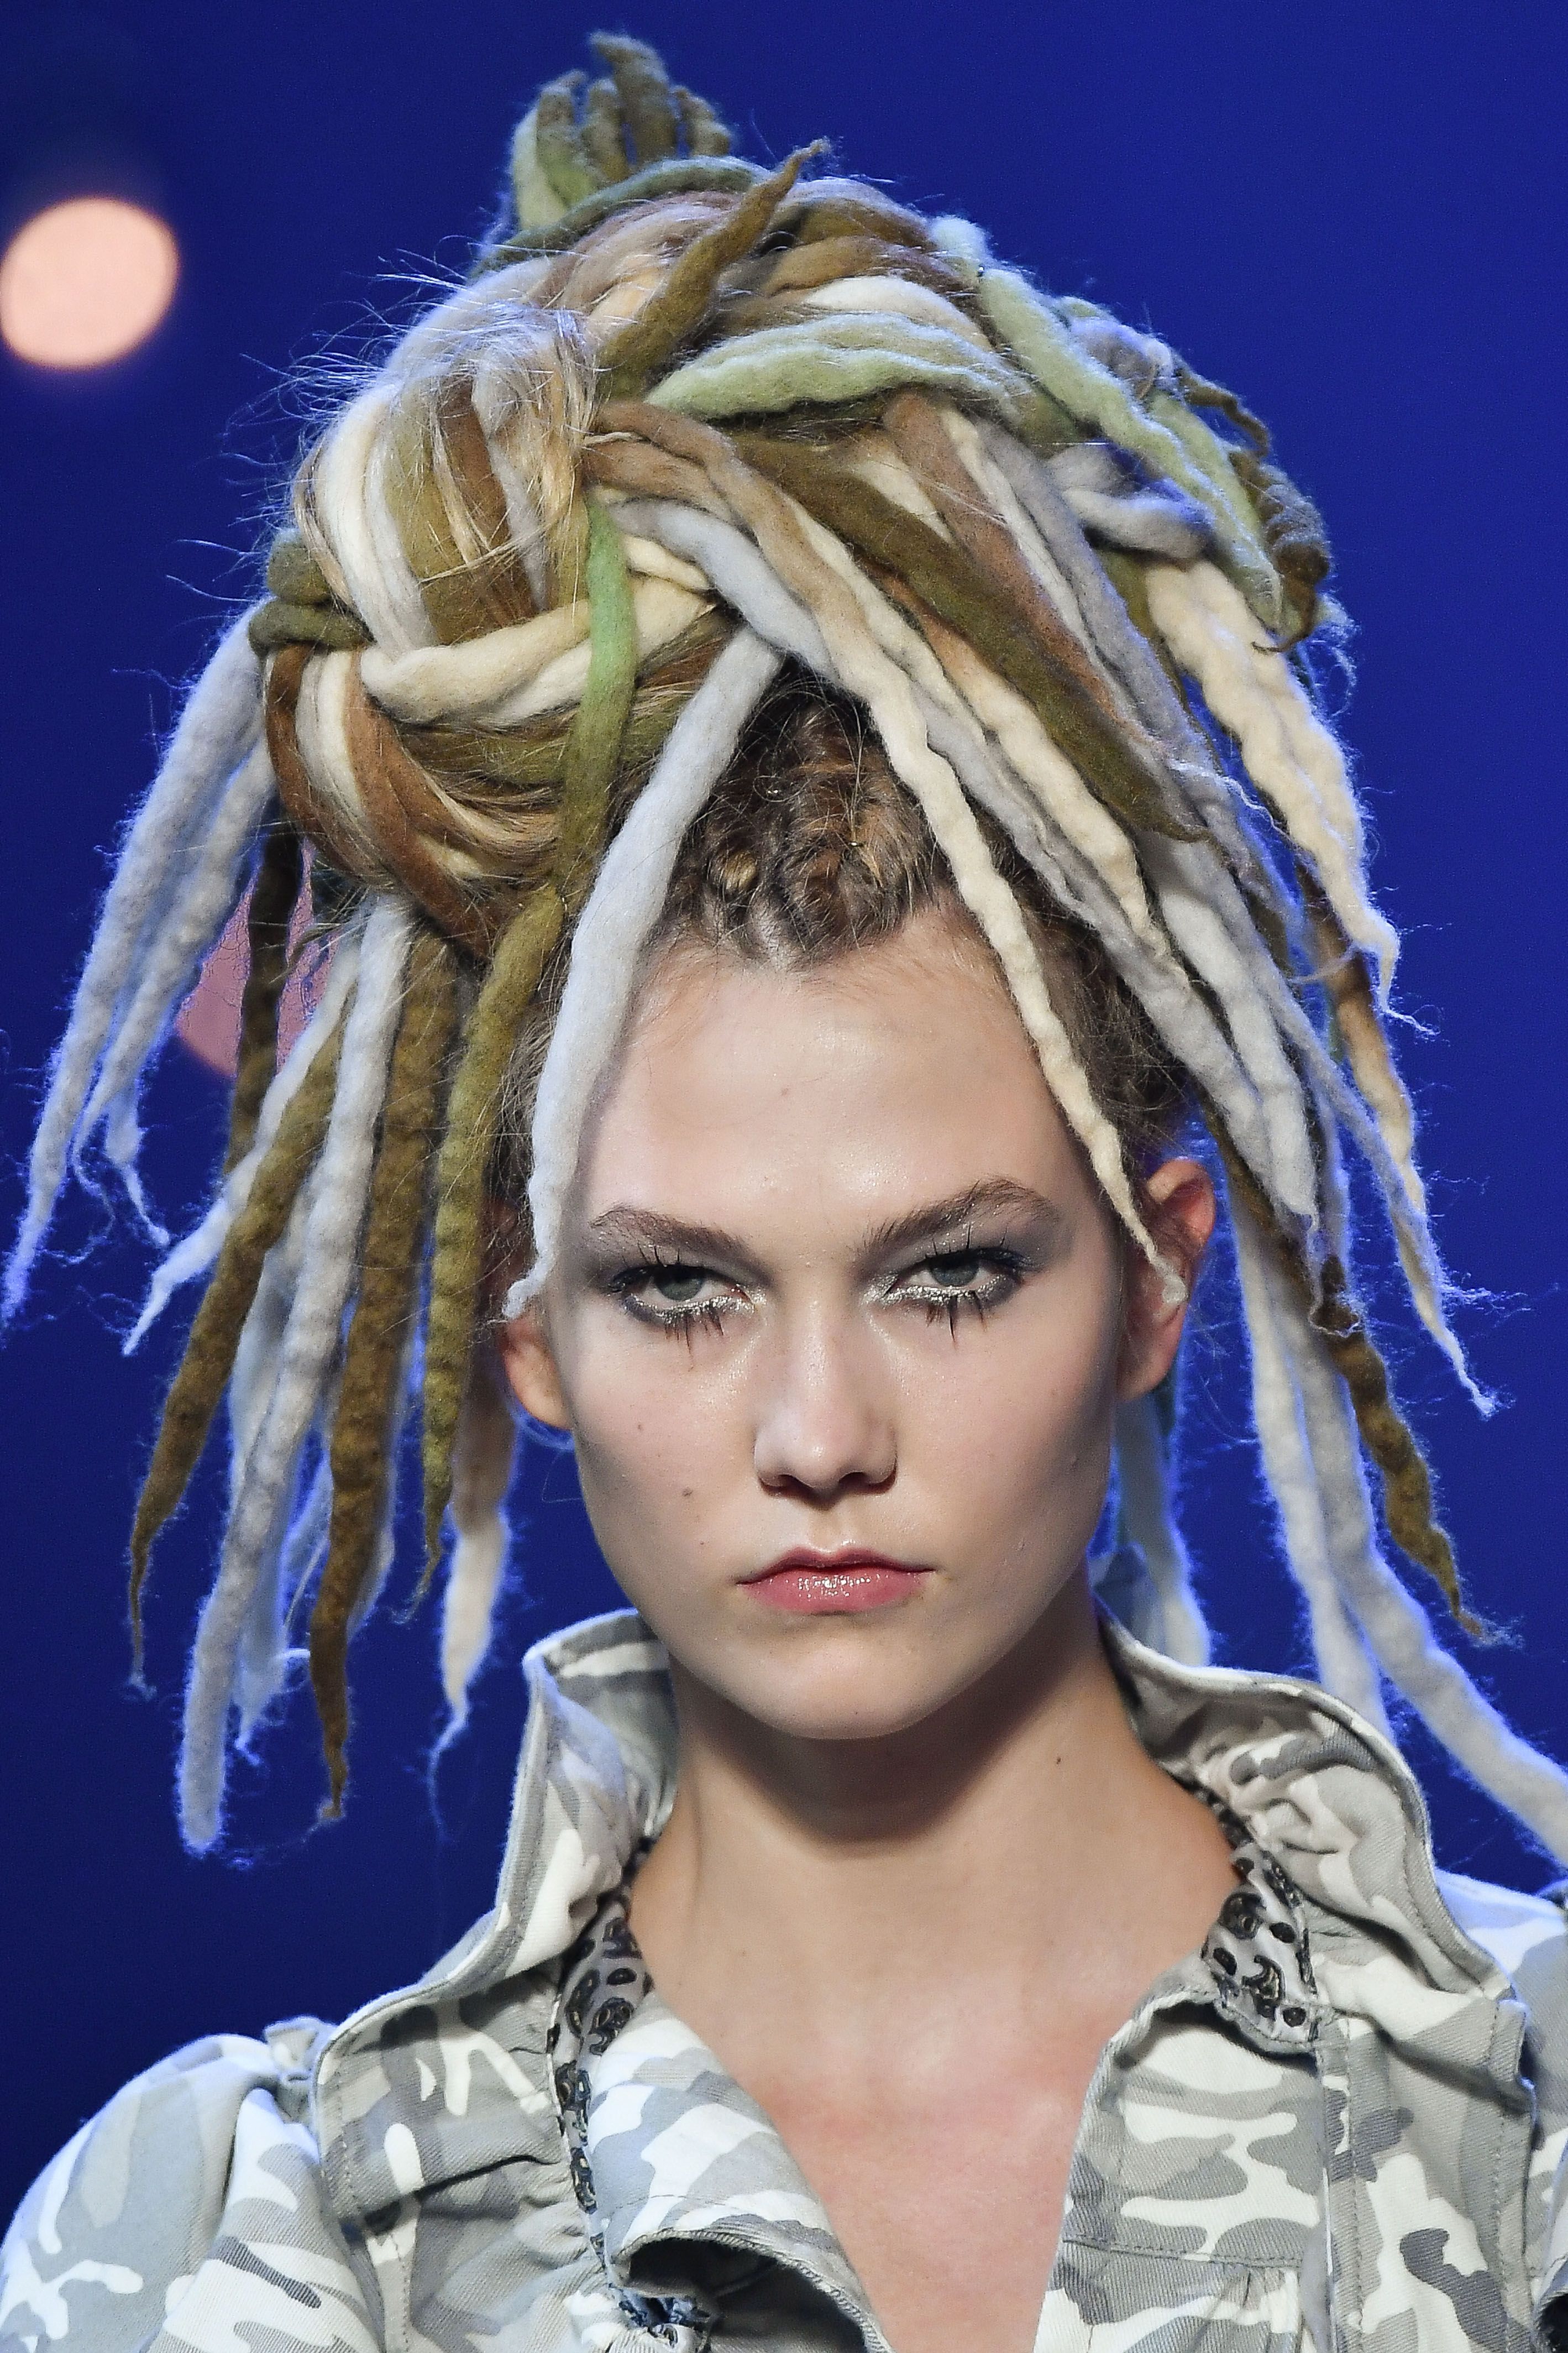 Liberated From the Fashion Grind, Marc Jacobs Finds Tension